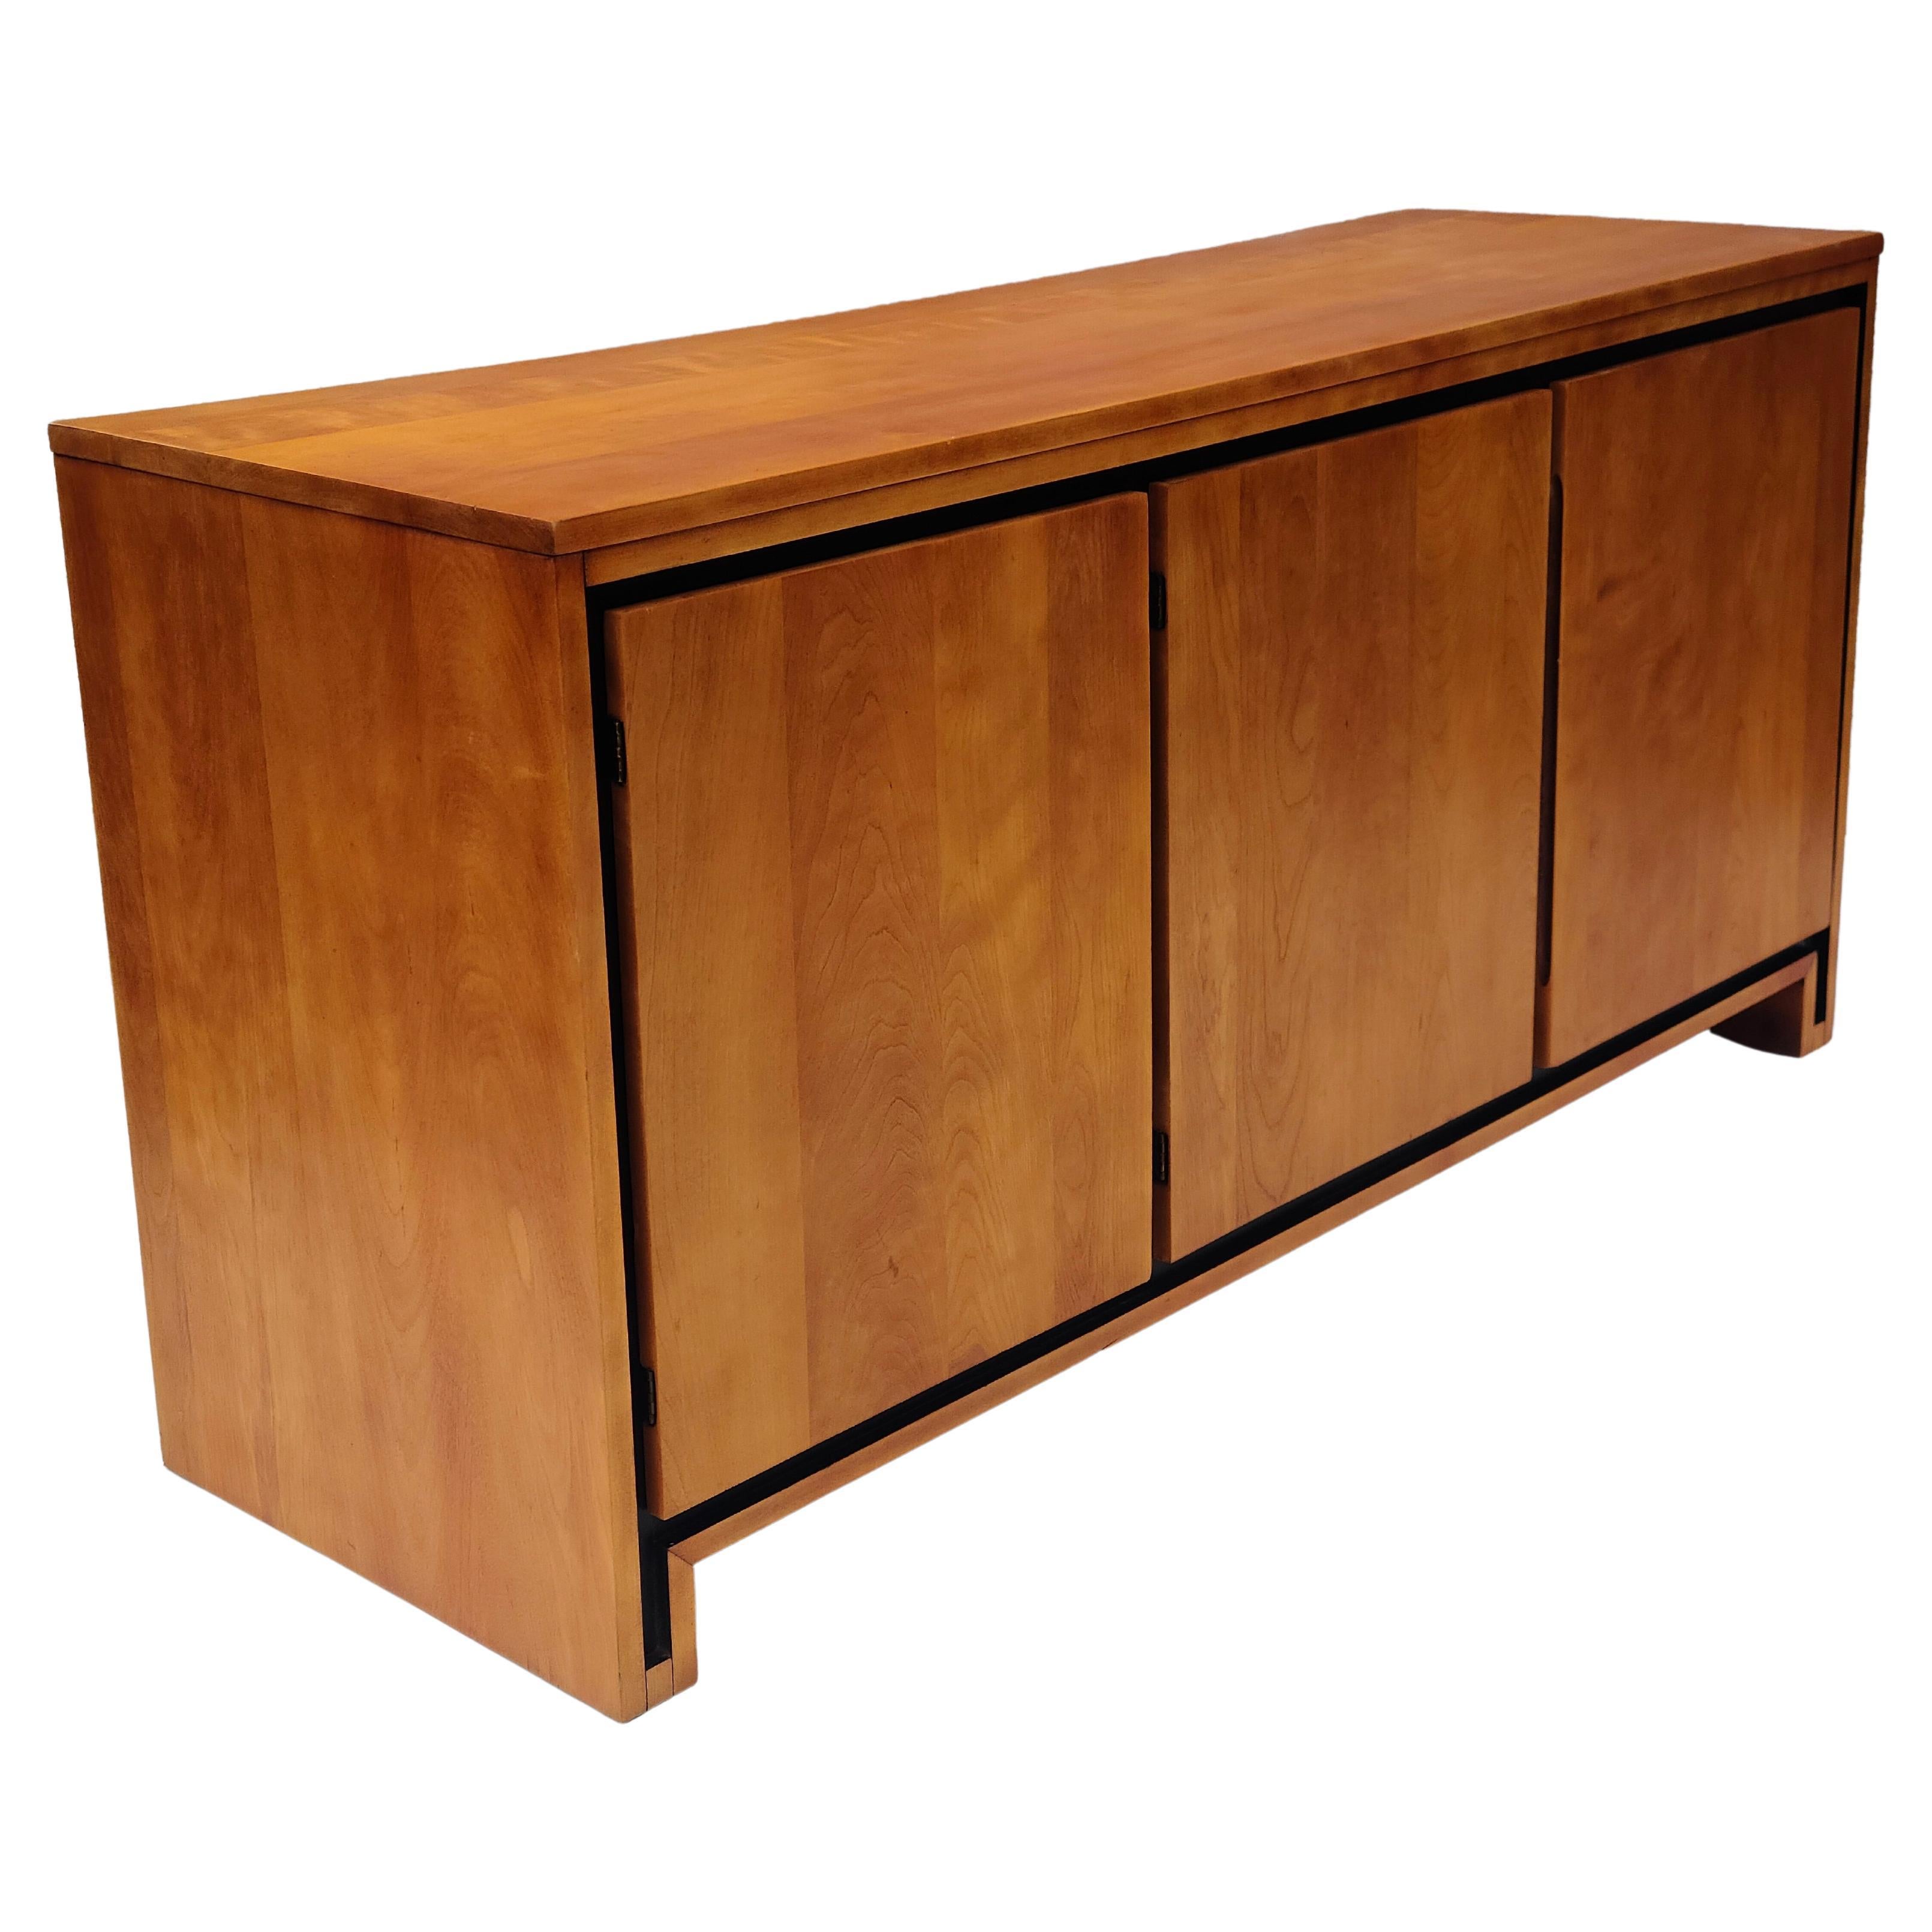 Please feel free to reach out for efficient shipping to your location.

Conant Ball three door credenza.
Designed by Leslie Diamond for the Modern Mates line.
Minimally invasive refinishing.

